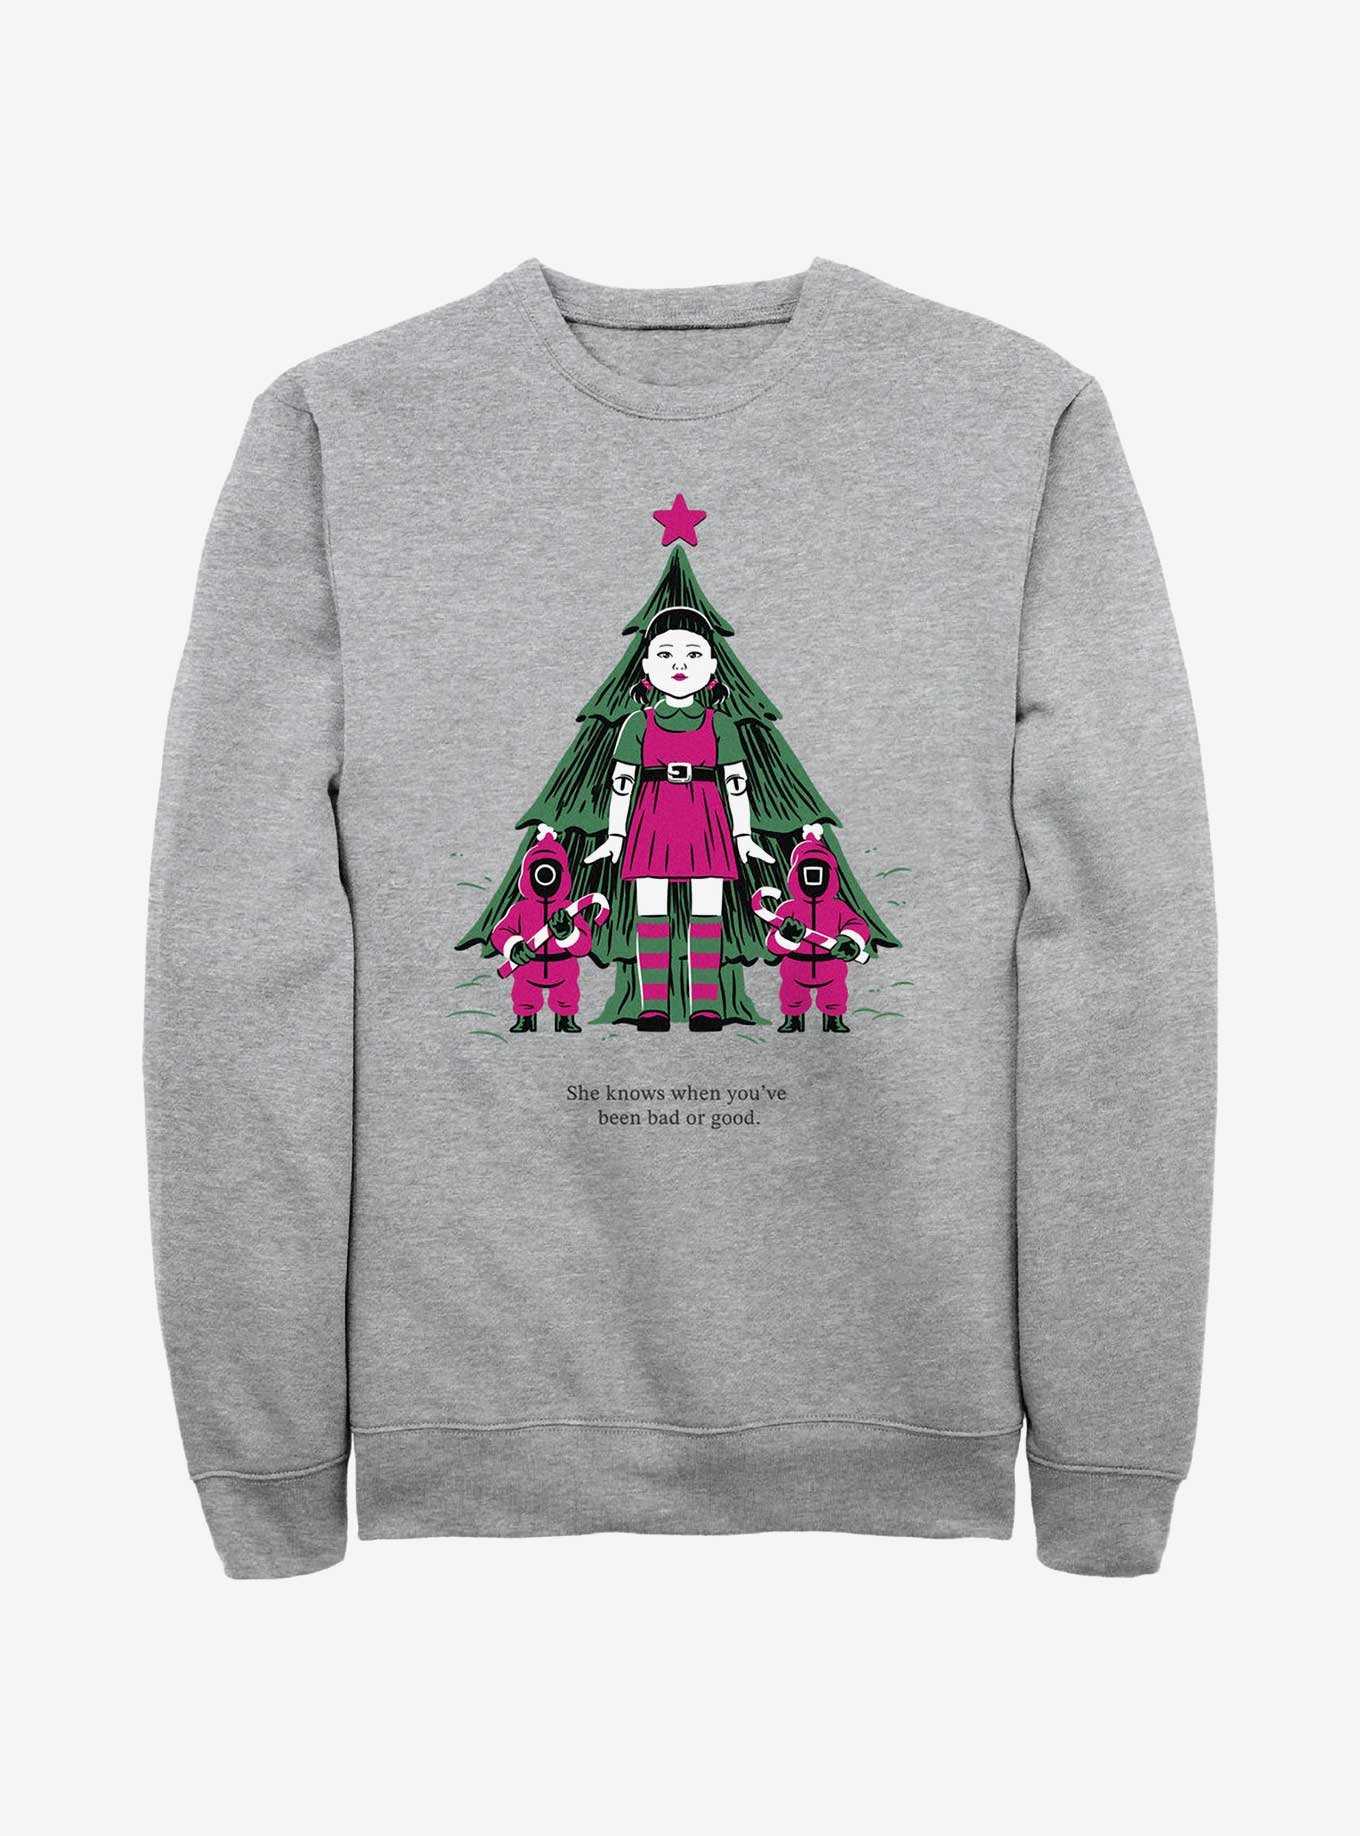 Squid Game Christmas Young-Hee Doll Knows Sweatshirt, , hi-res